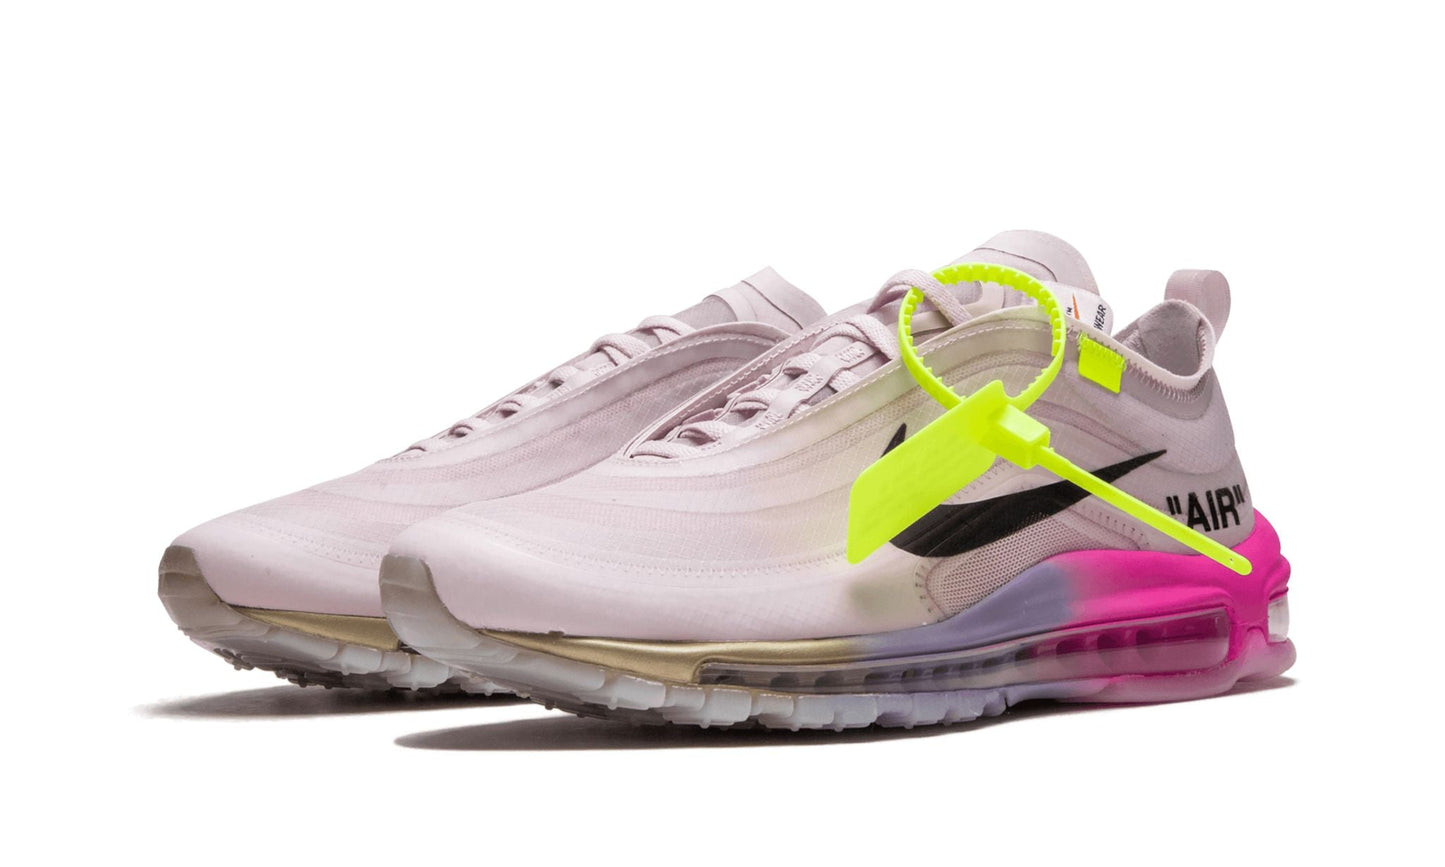 NIKE X OFF-WHITE THE 10: AIR MAX 97 OG "Queen of Queens, NY"